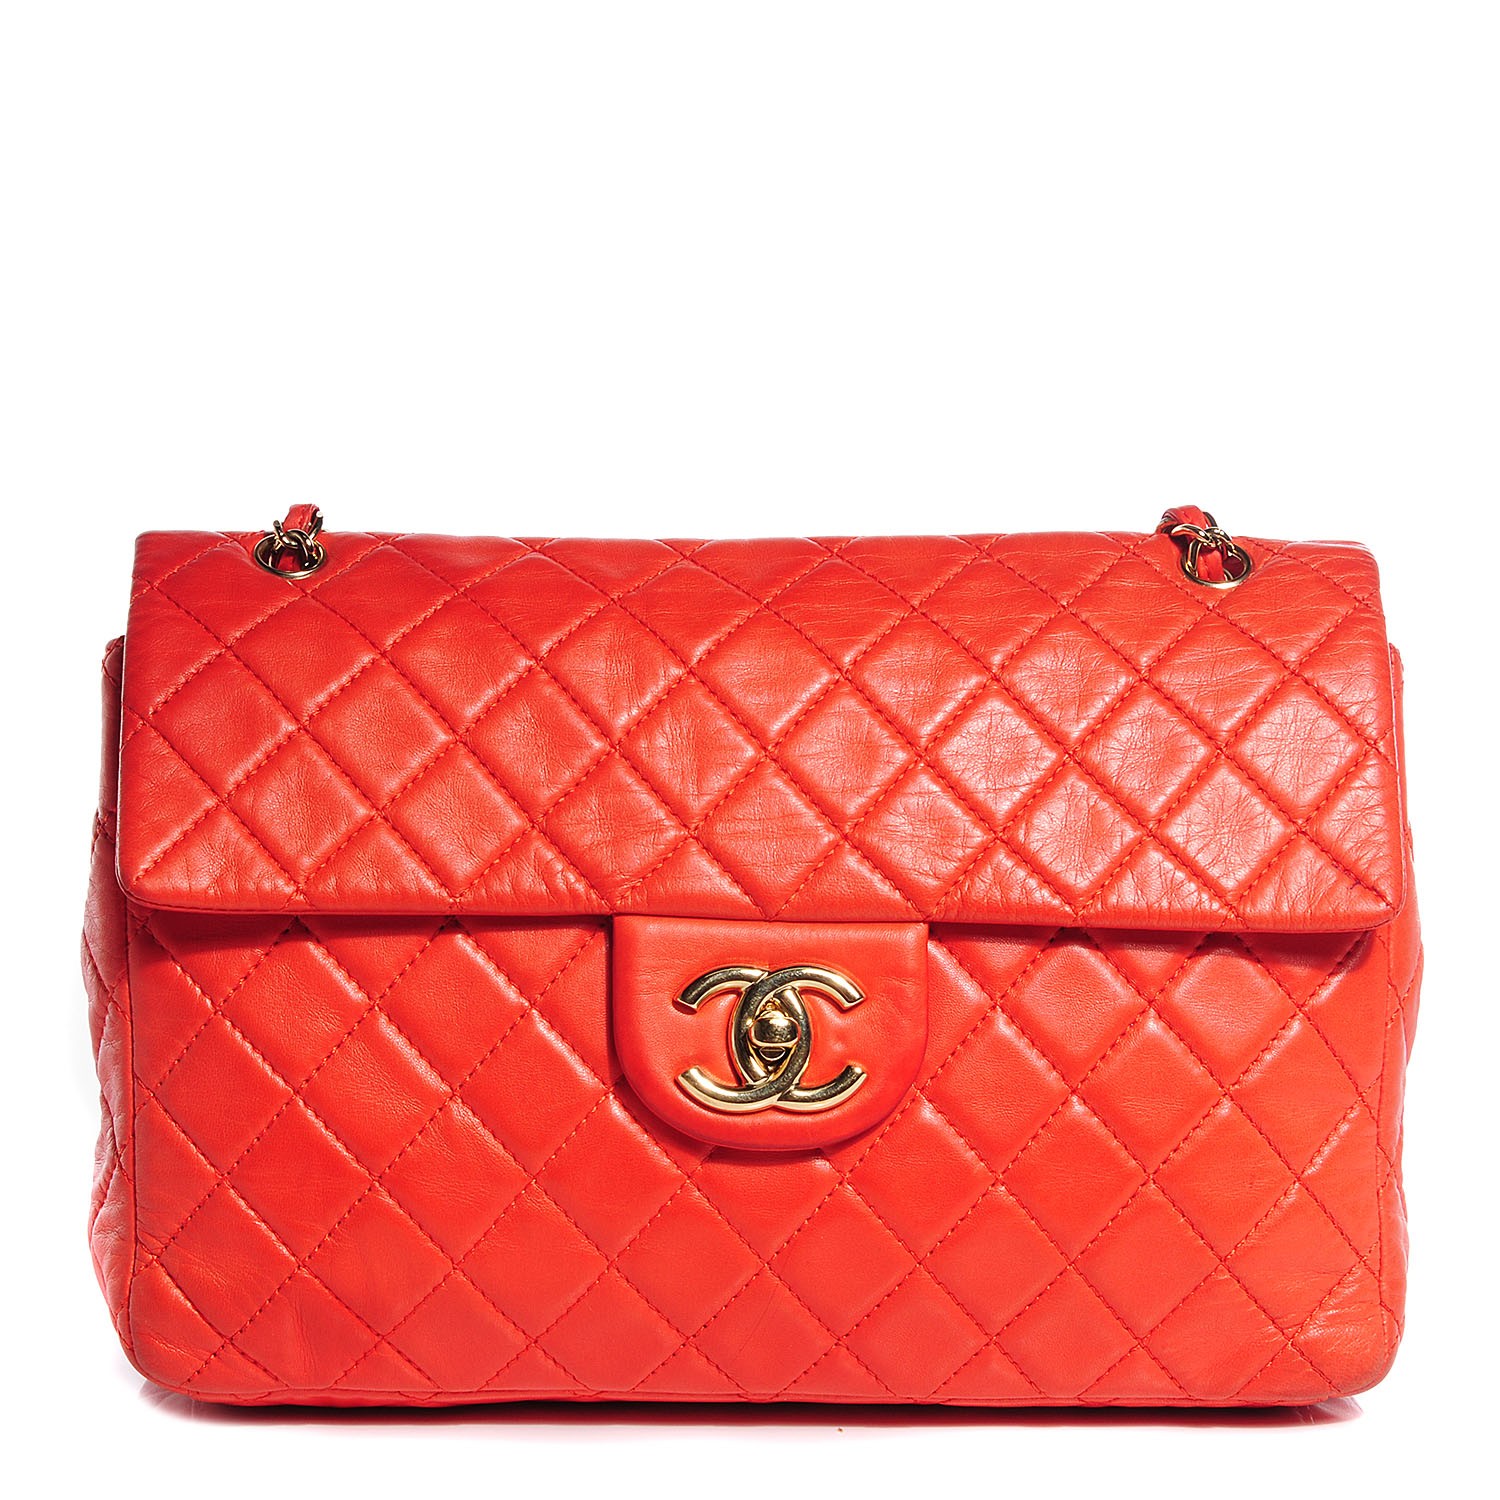 CHANEL Lambskin Quilted Maxi Single Flap Coral 94024 | FASHIONPHILE